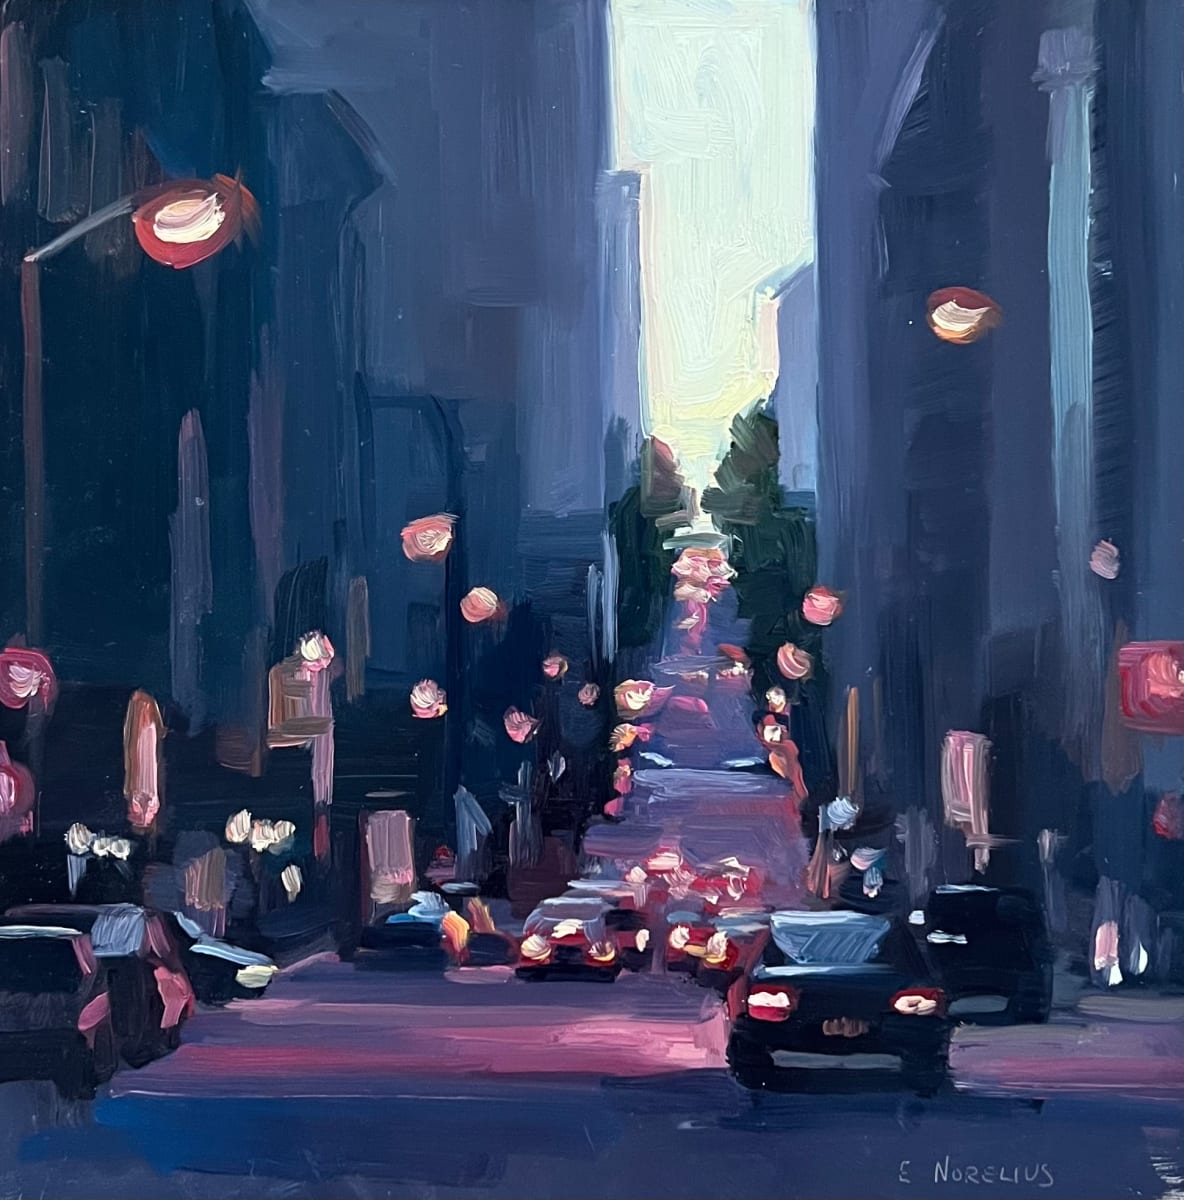 Lights of the City at Dusk by Erica Norelius 